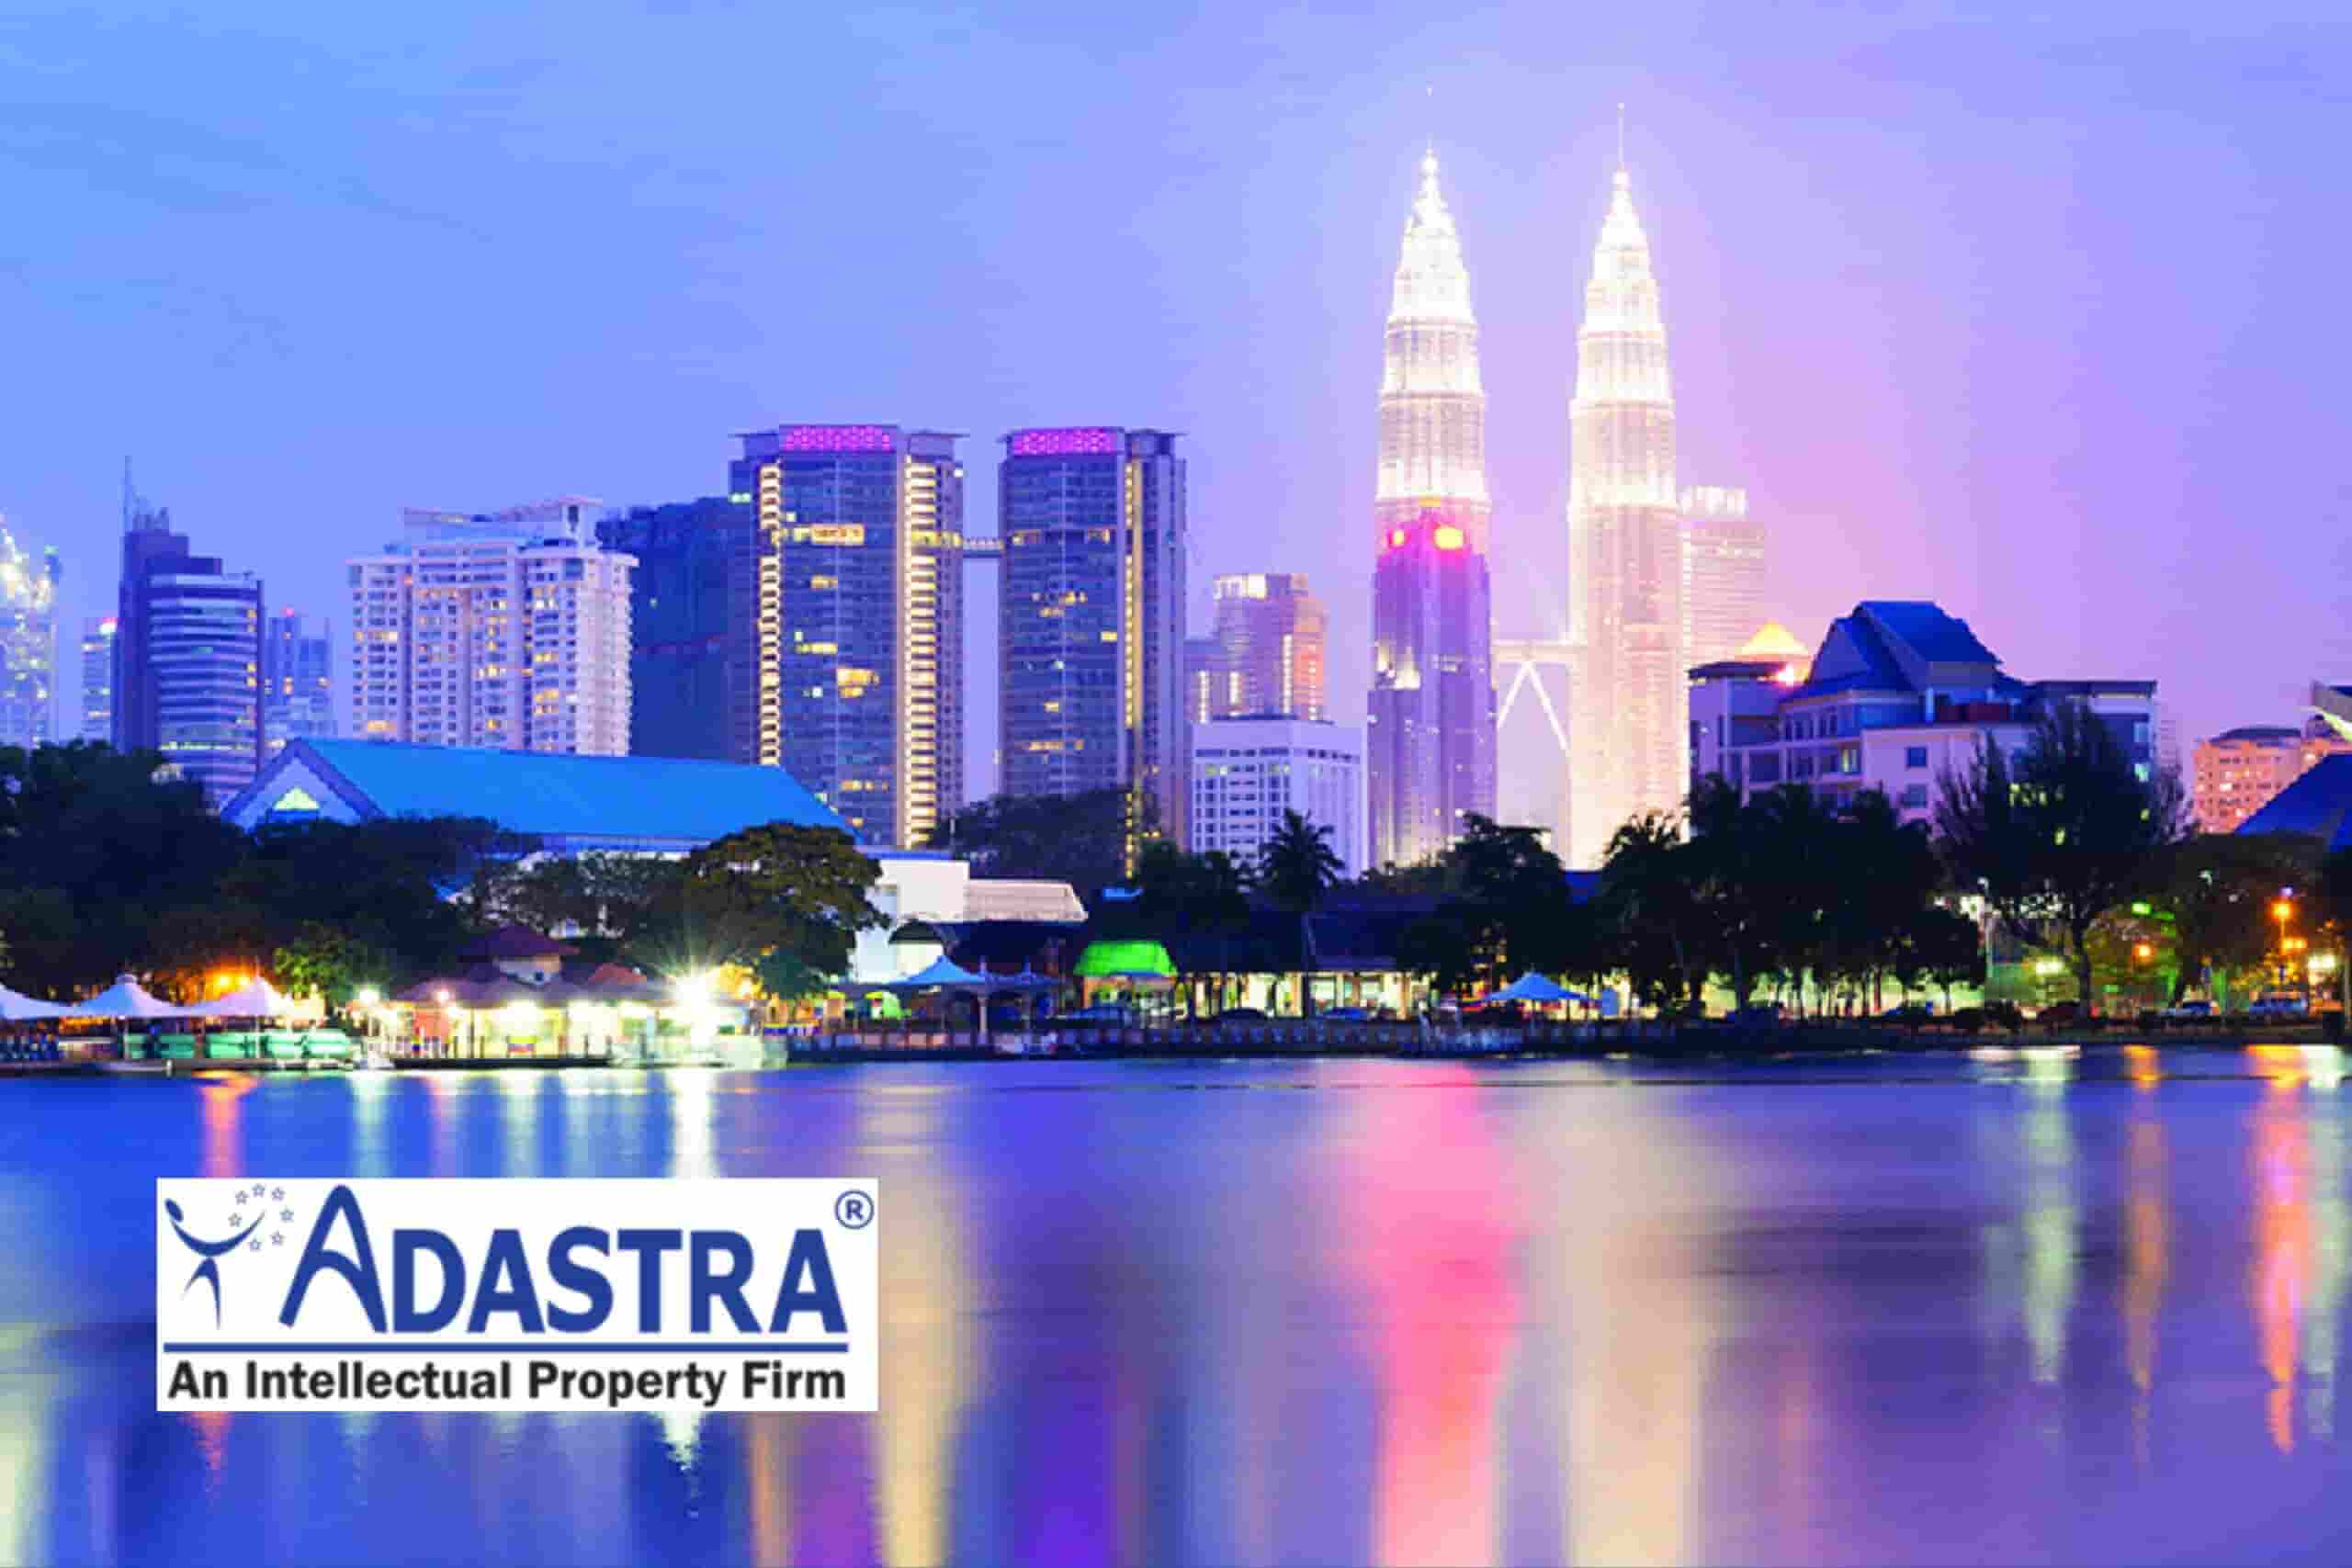 Blog post - Inngot and Adastra launch new alliance for Malaysia, improving access to IP valuation